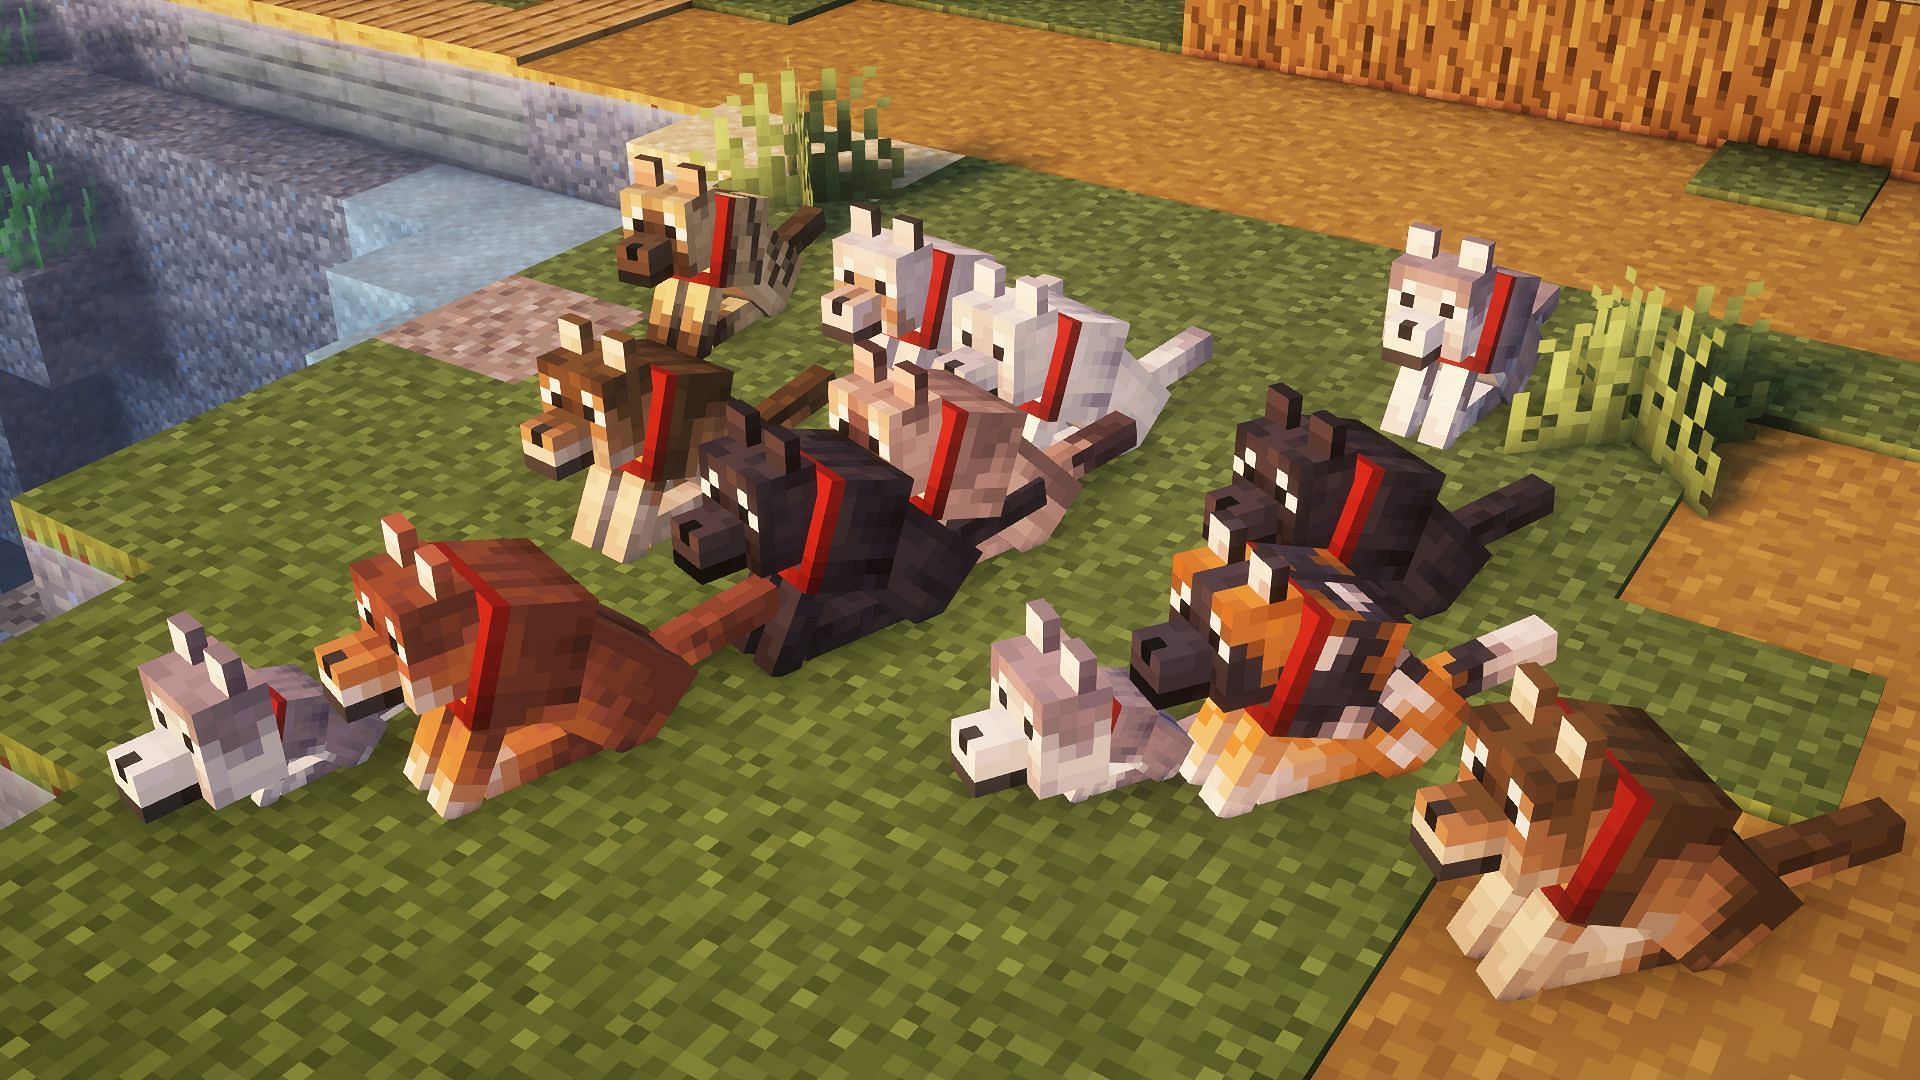 How to spawn any wolf variant in Minecraft using commands